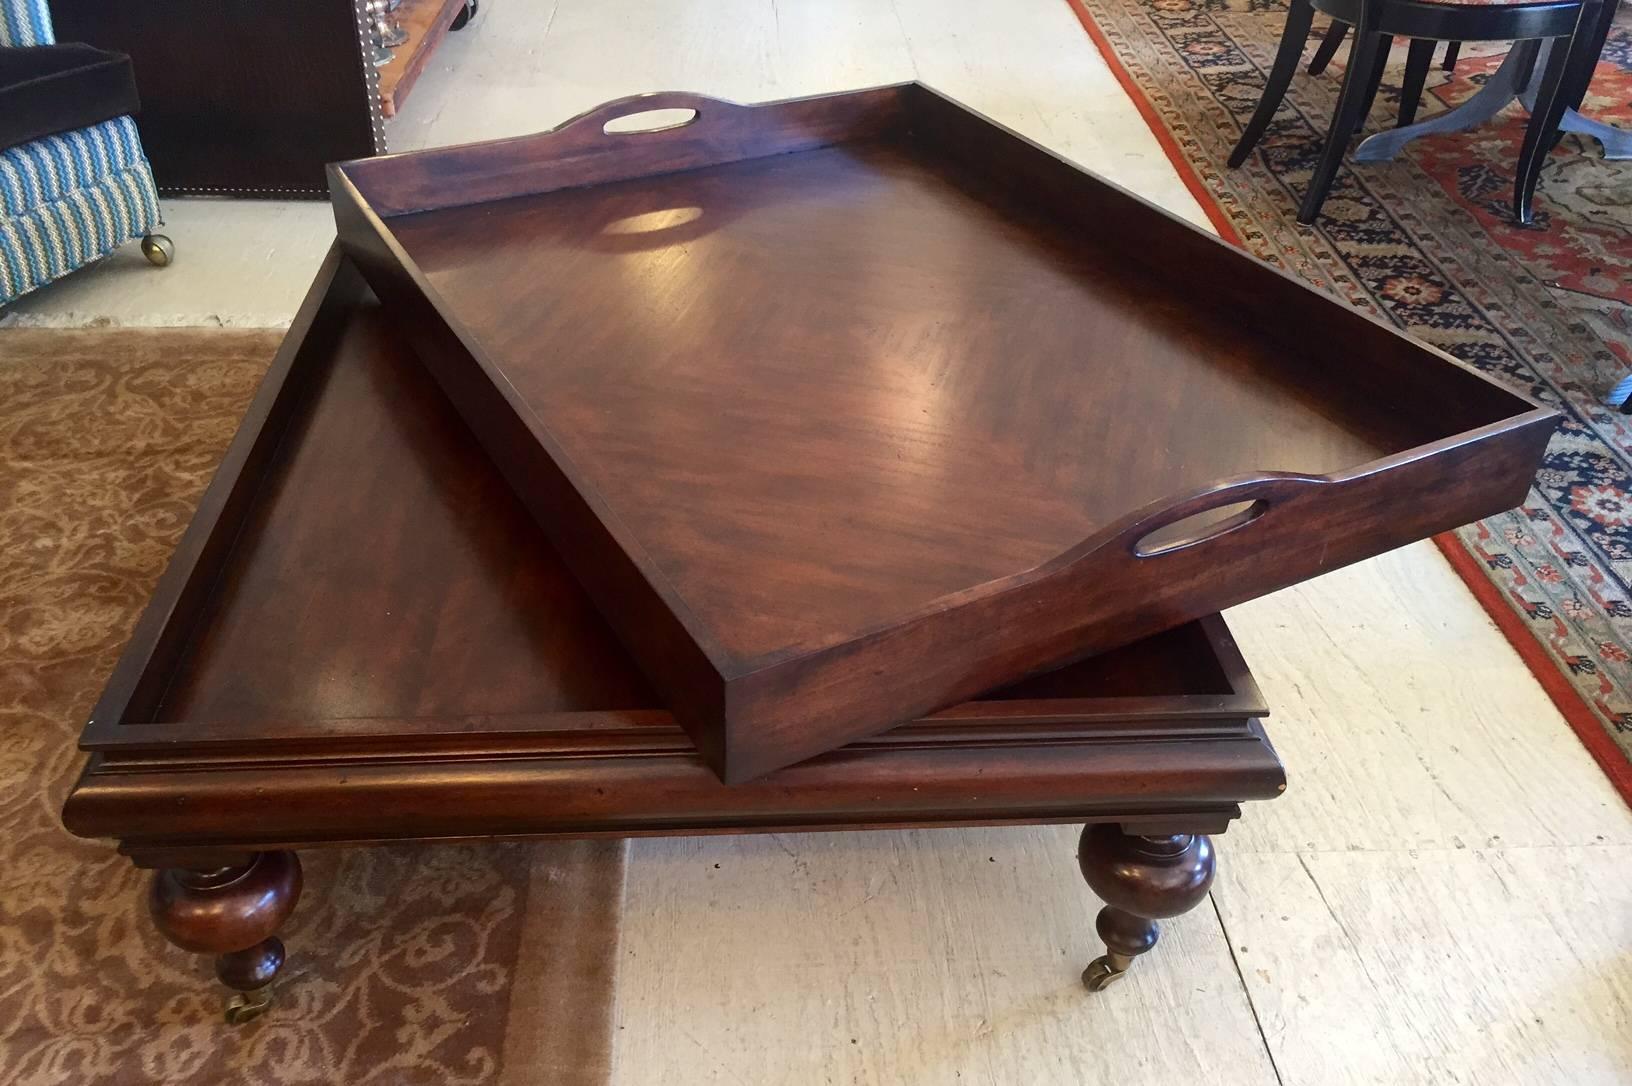 Large elegant mahogany coffee table with removable butler's tray top and chunky ball legs on brass casters, by Restoration Hardware.
16 1/2